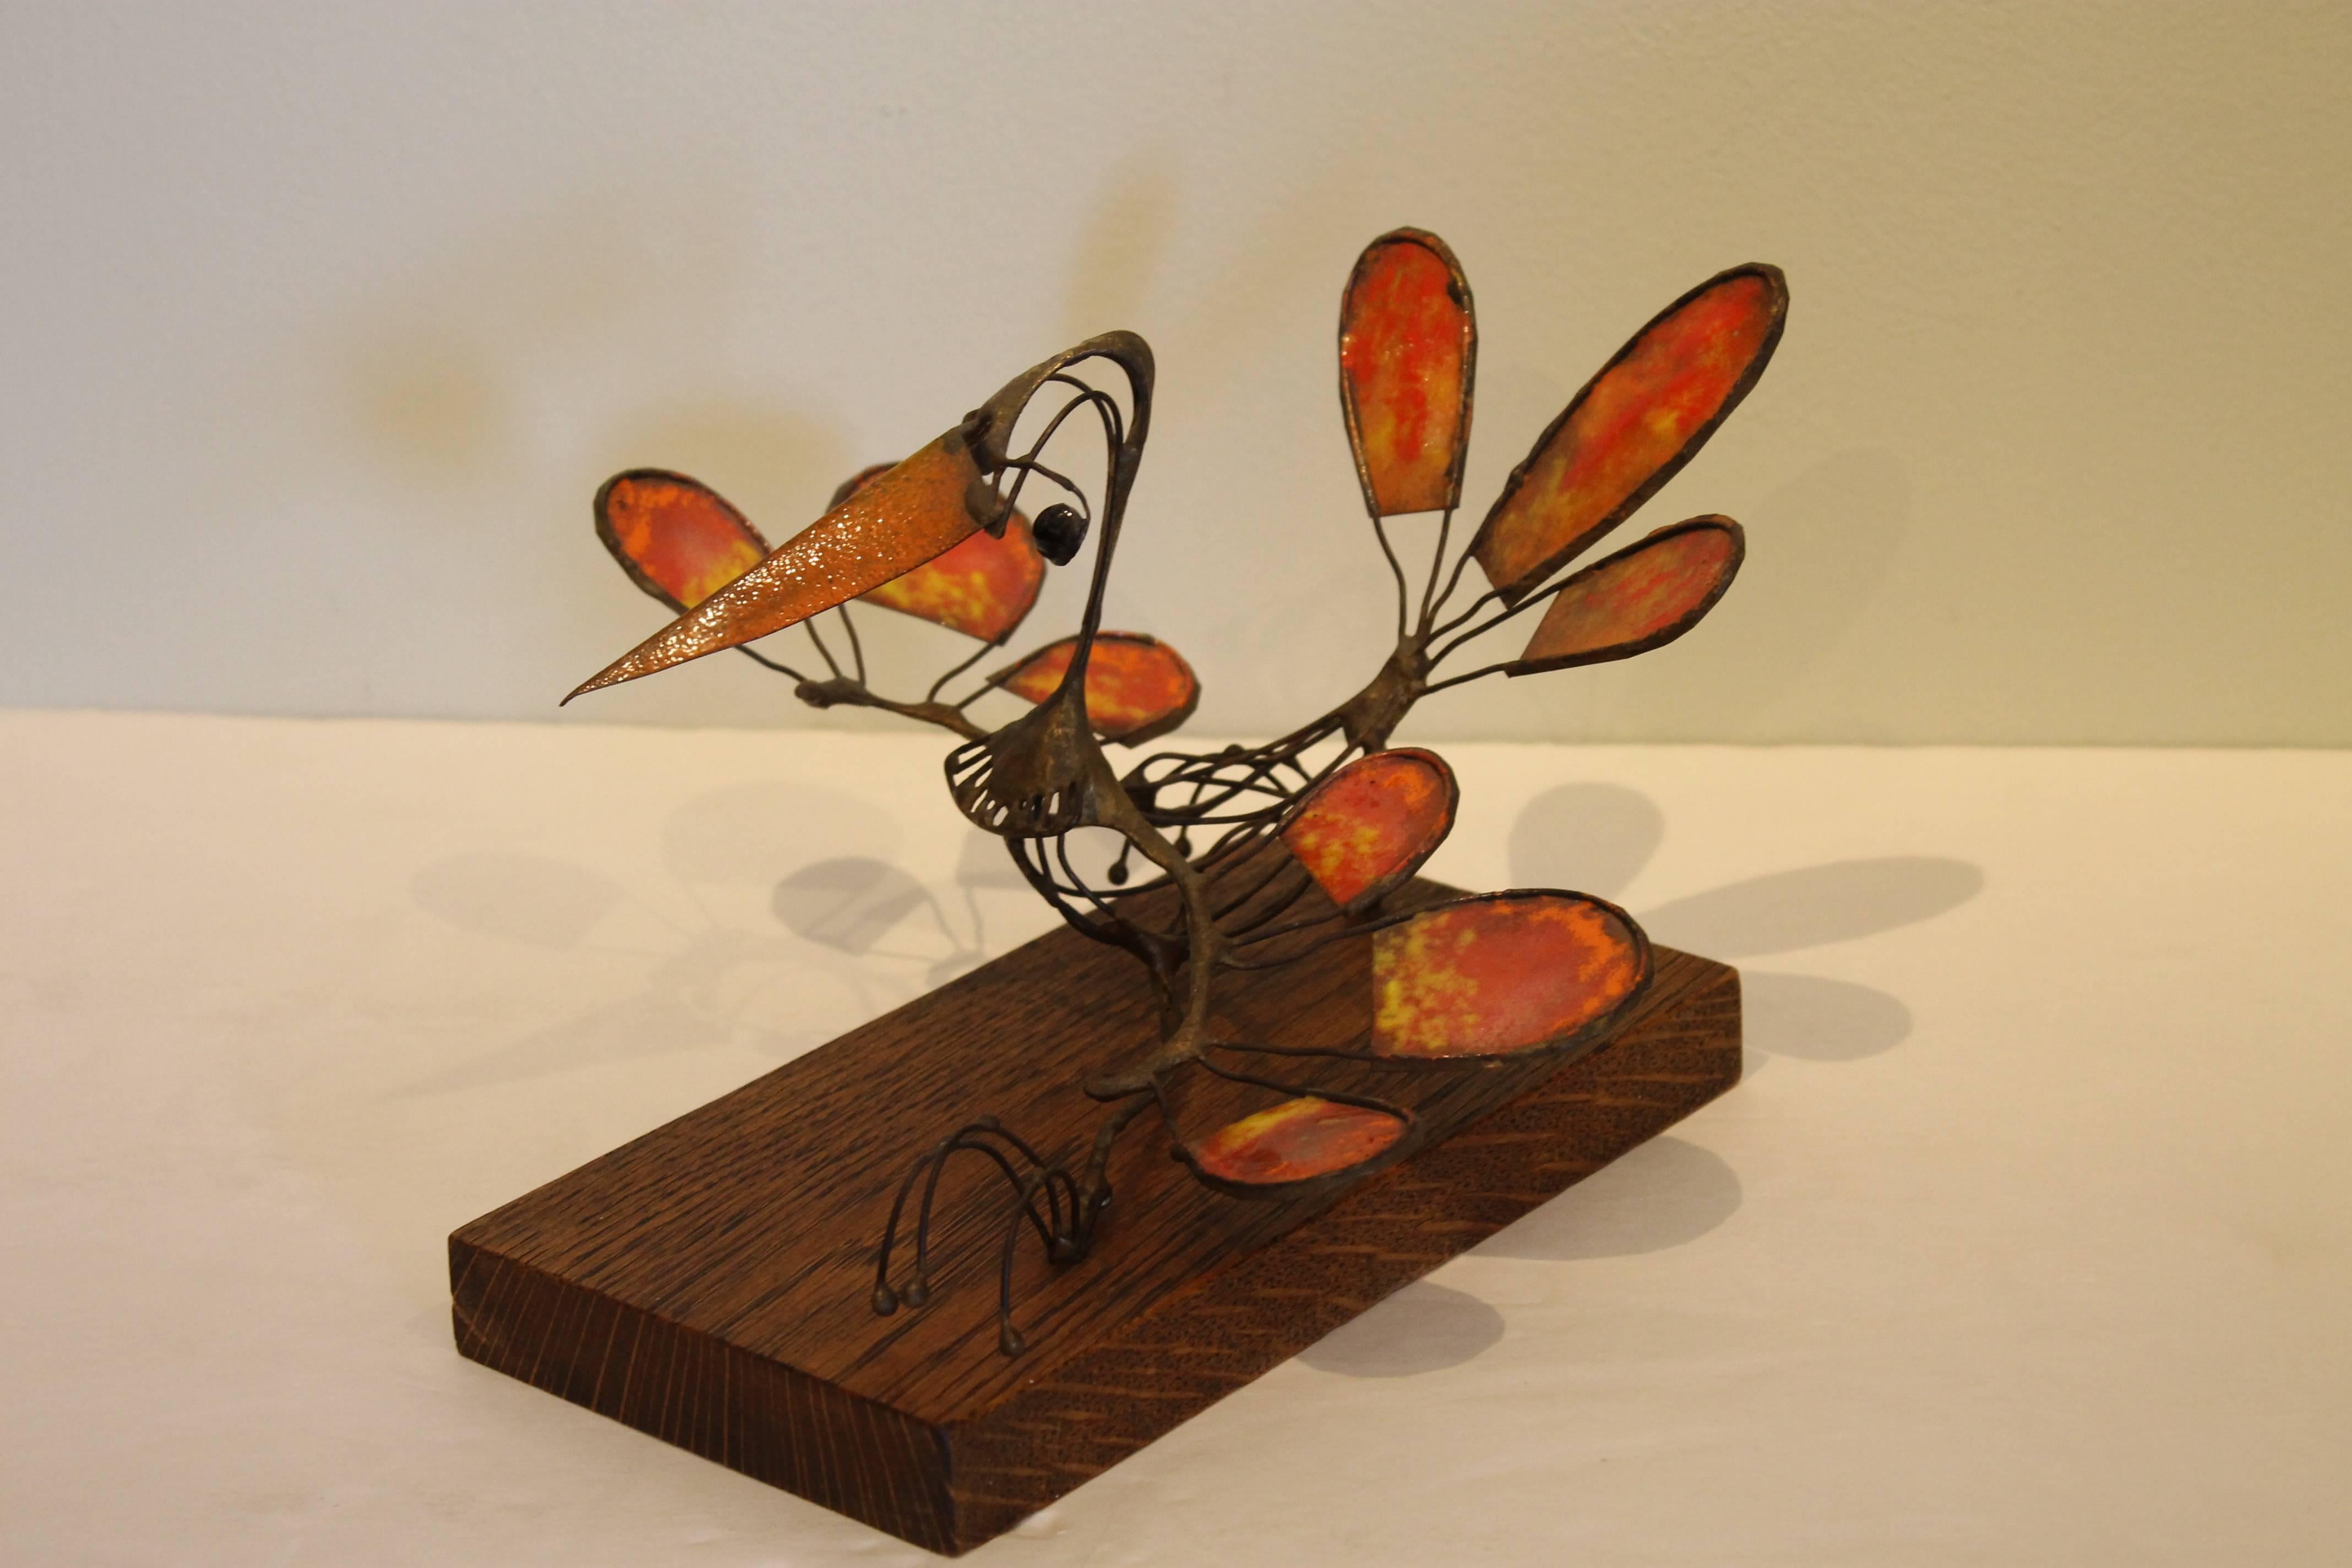 Copper and Enamel Bird Sculpture by Russ Shears